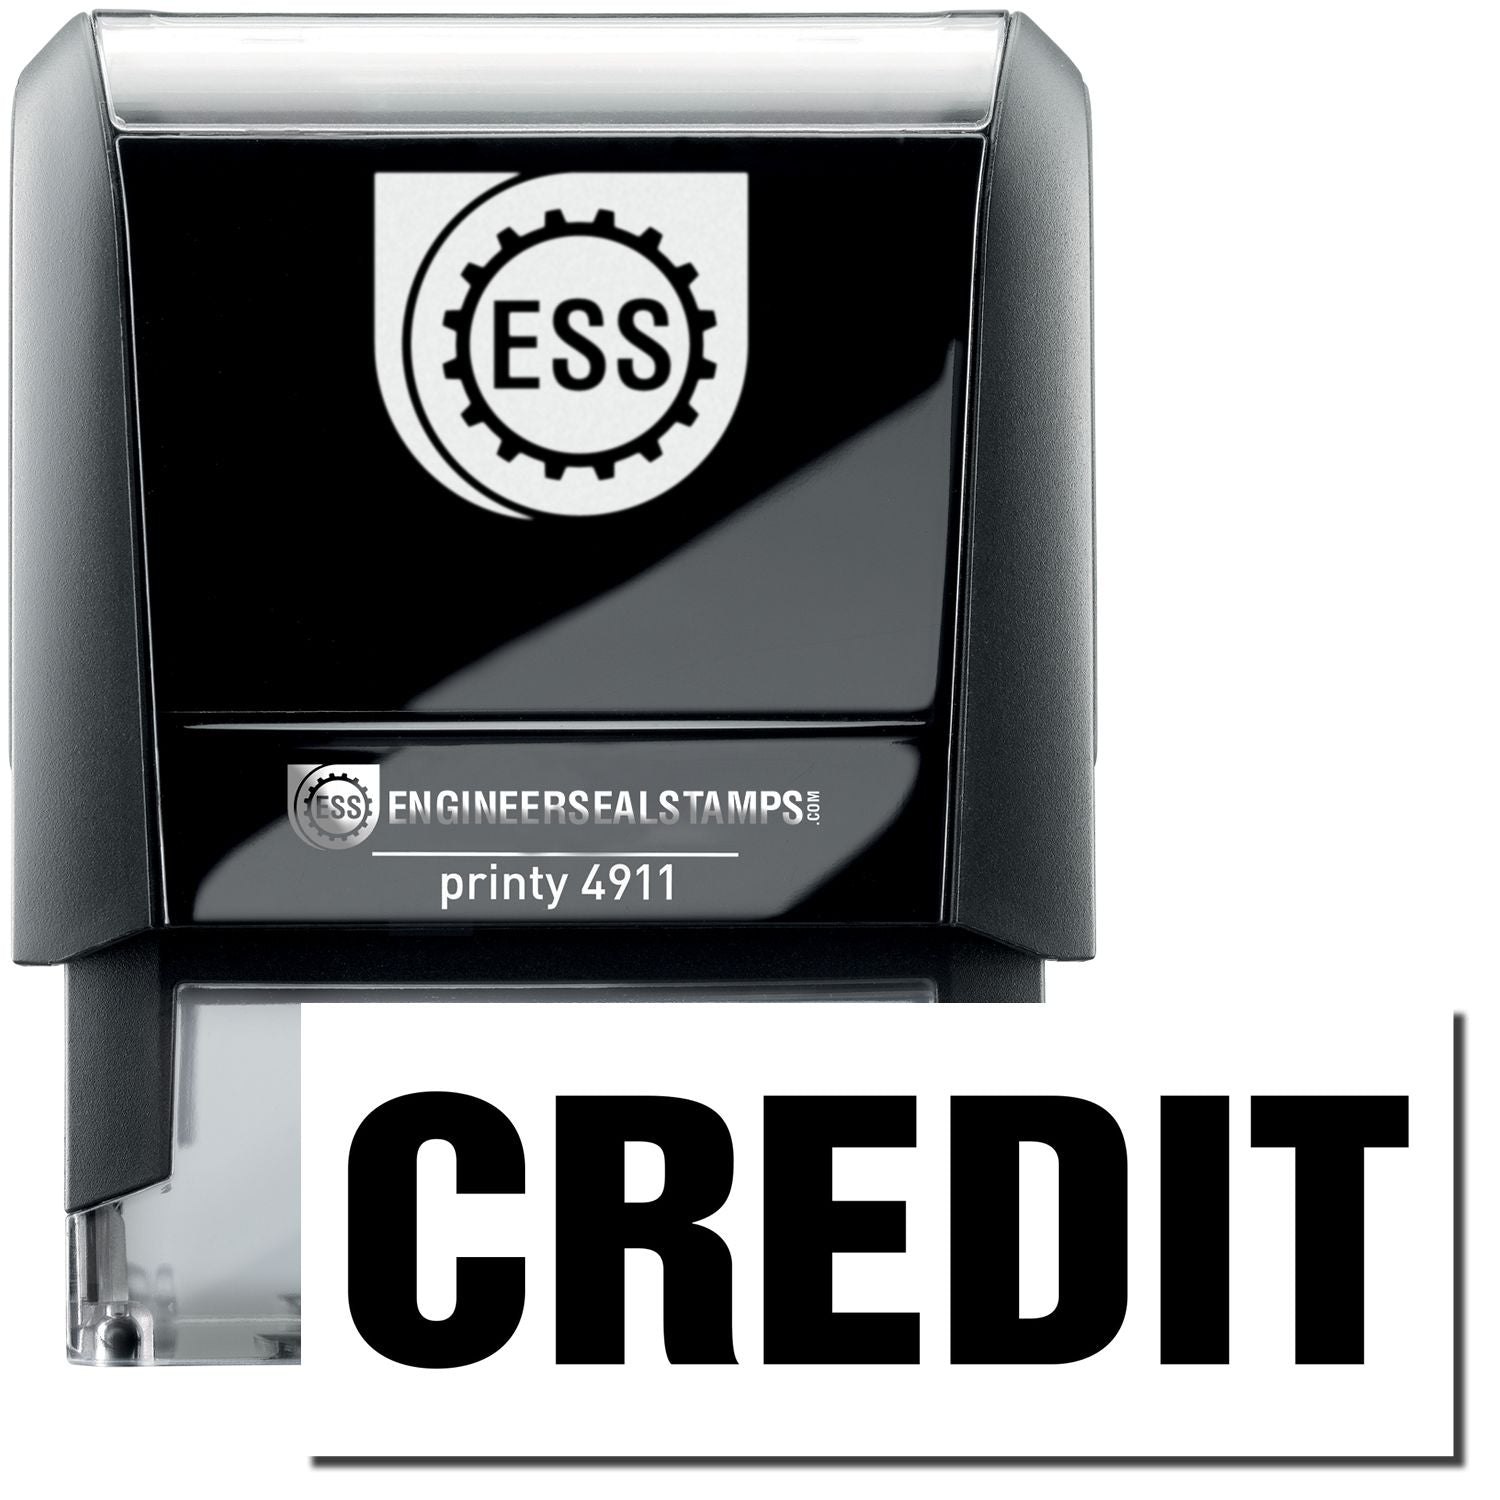 A self-inking stamp with a stamped image showing how the text "CREDIT" in bold font is displayed after stamping.